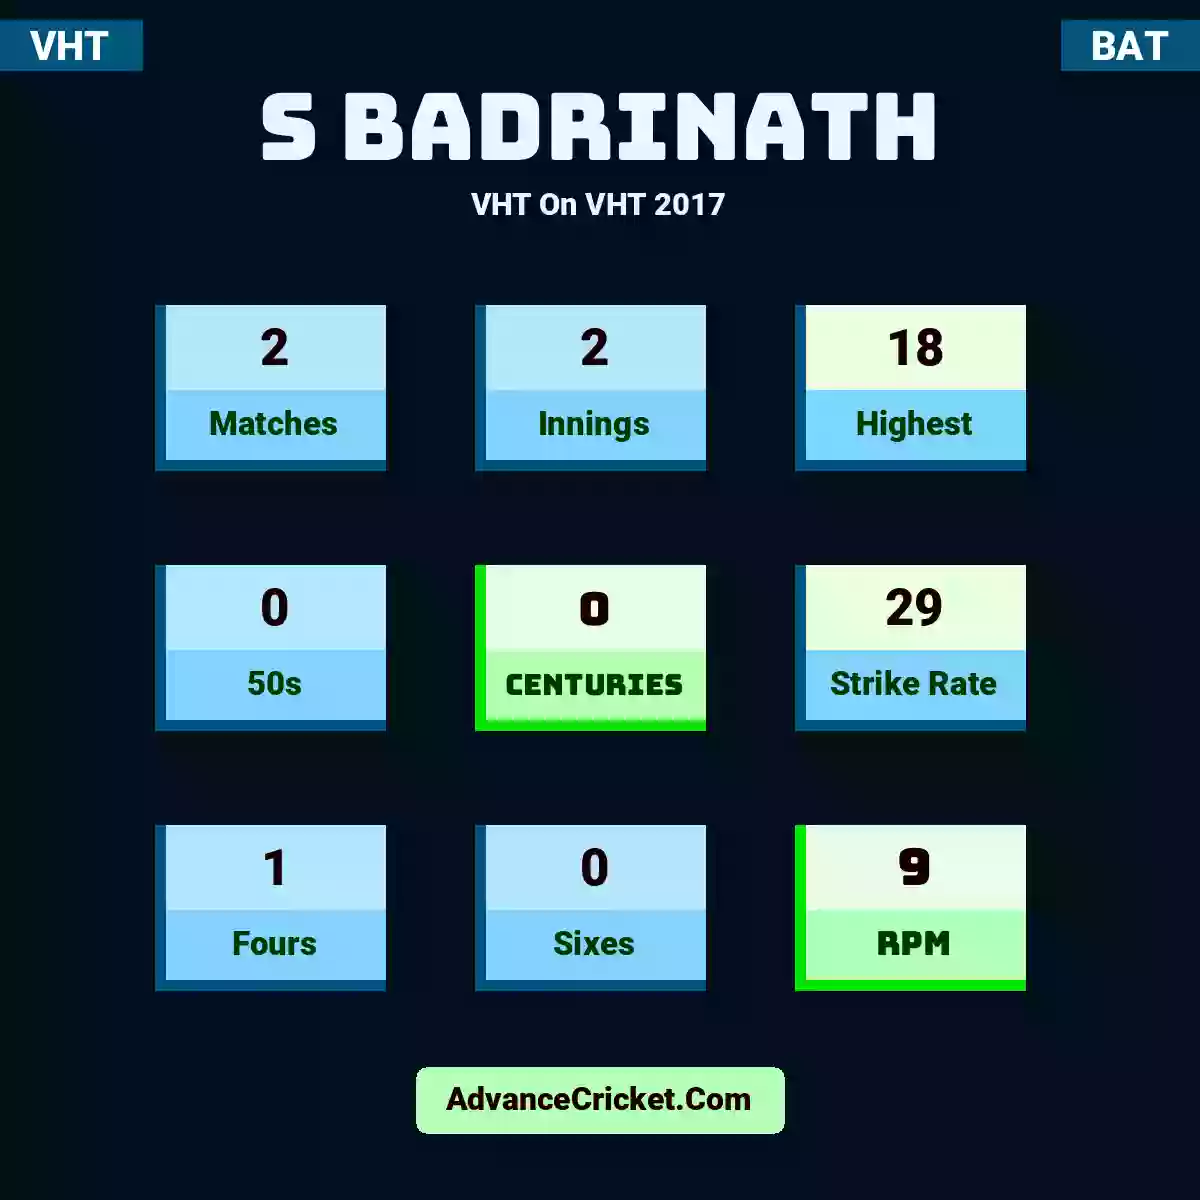 S Badrinath VHT  On VHT 2017, S Badrinath played 2 matches, scored 18 runs as highest, 0 half-centuries, and 0 centuries, with a strike rate of 29. S.Badrinath hit 1 fours and 0 sixes, with an RPM of 9.